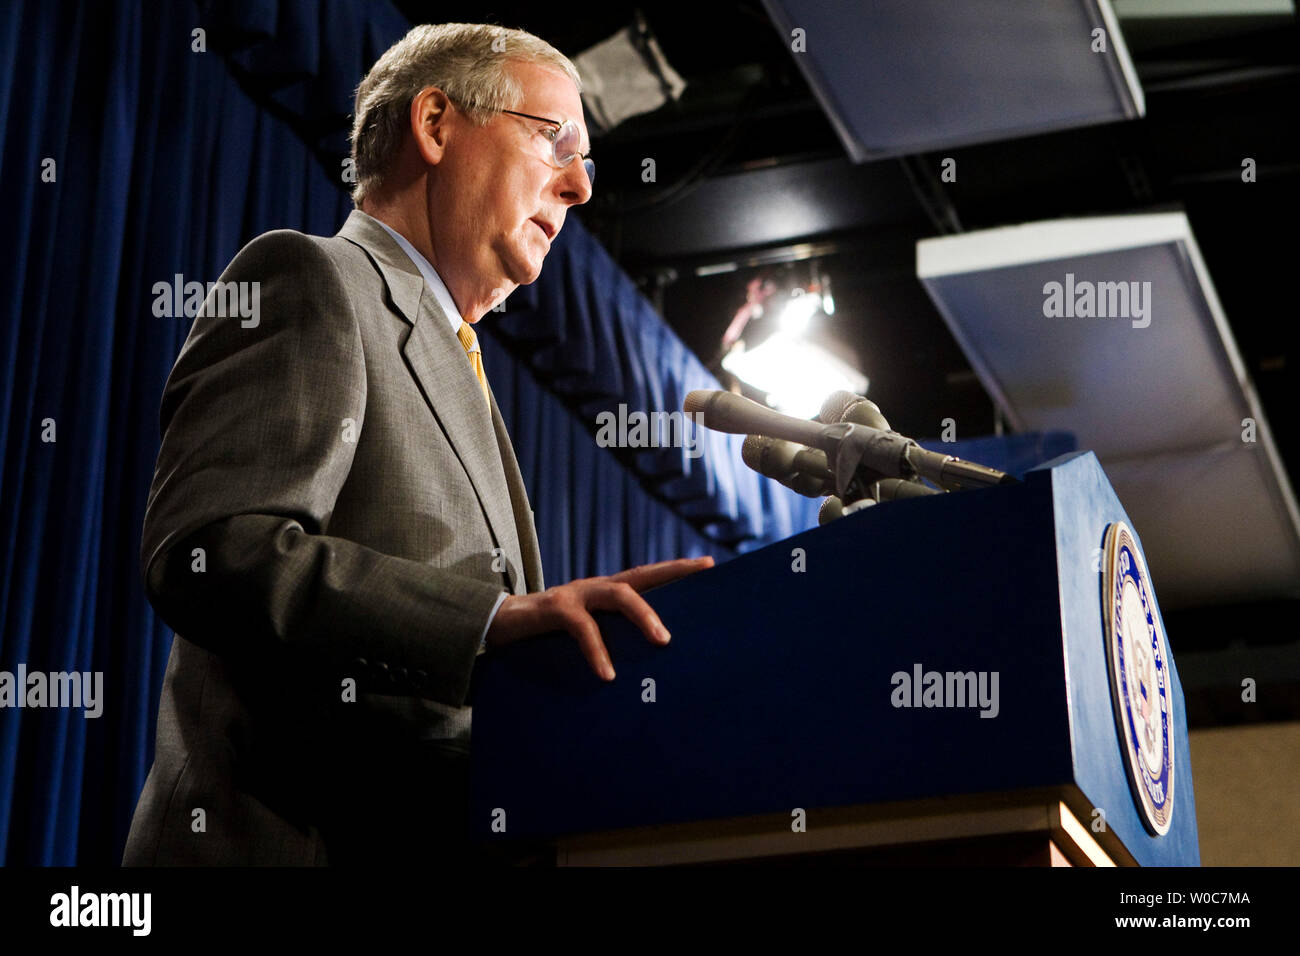 Senate Minority Leader Mitch McConnell, R-KY, speaks on the Lieberman-Warner Climate Security Act of 2008 on Capitol Hill in Washington on June 5, 2008. (UPI Photo/Patrick D. McDermott) Stock Photo